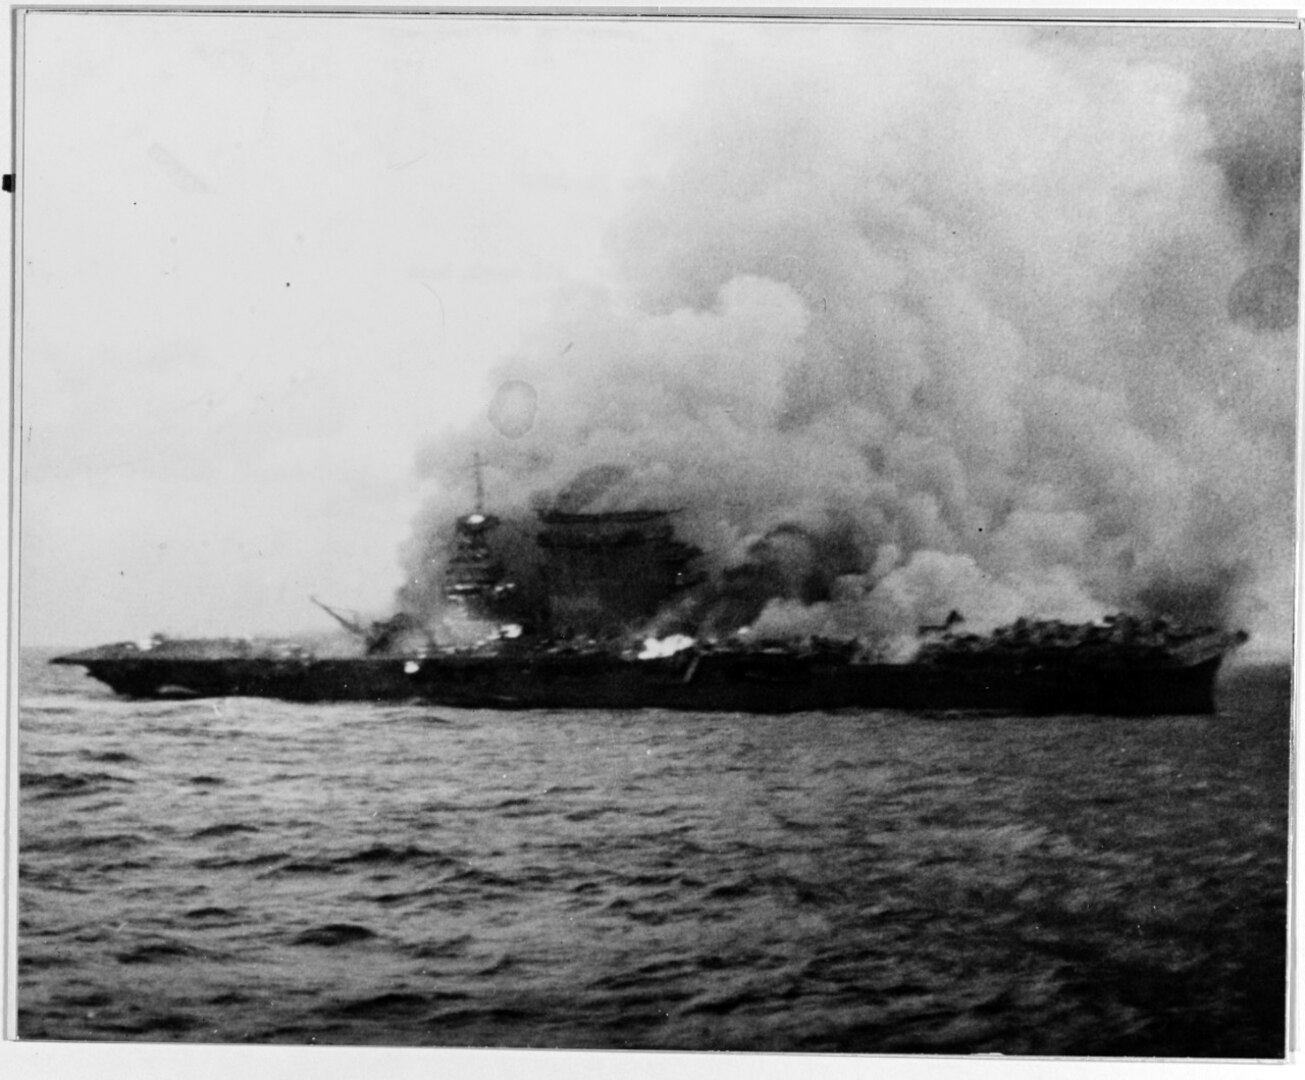 The burning and sinking of the USS Lexington (CV-2) after her crew abandoned ship during the Battle of Coral Sea.